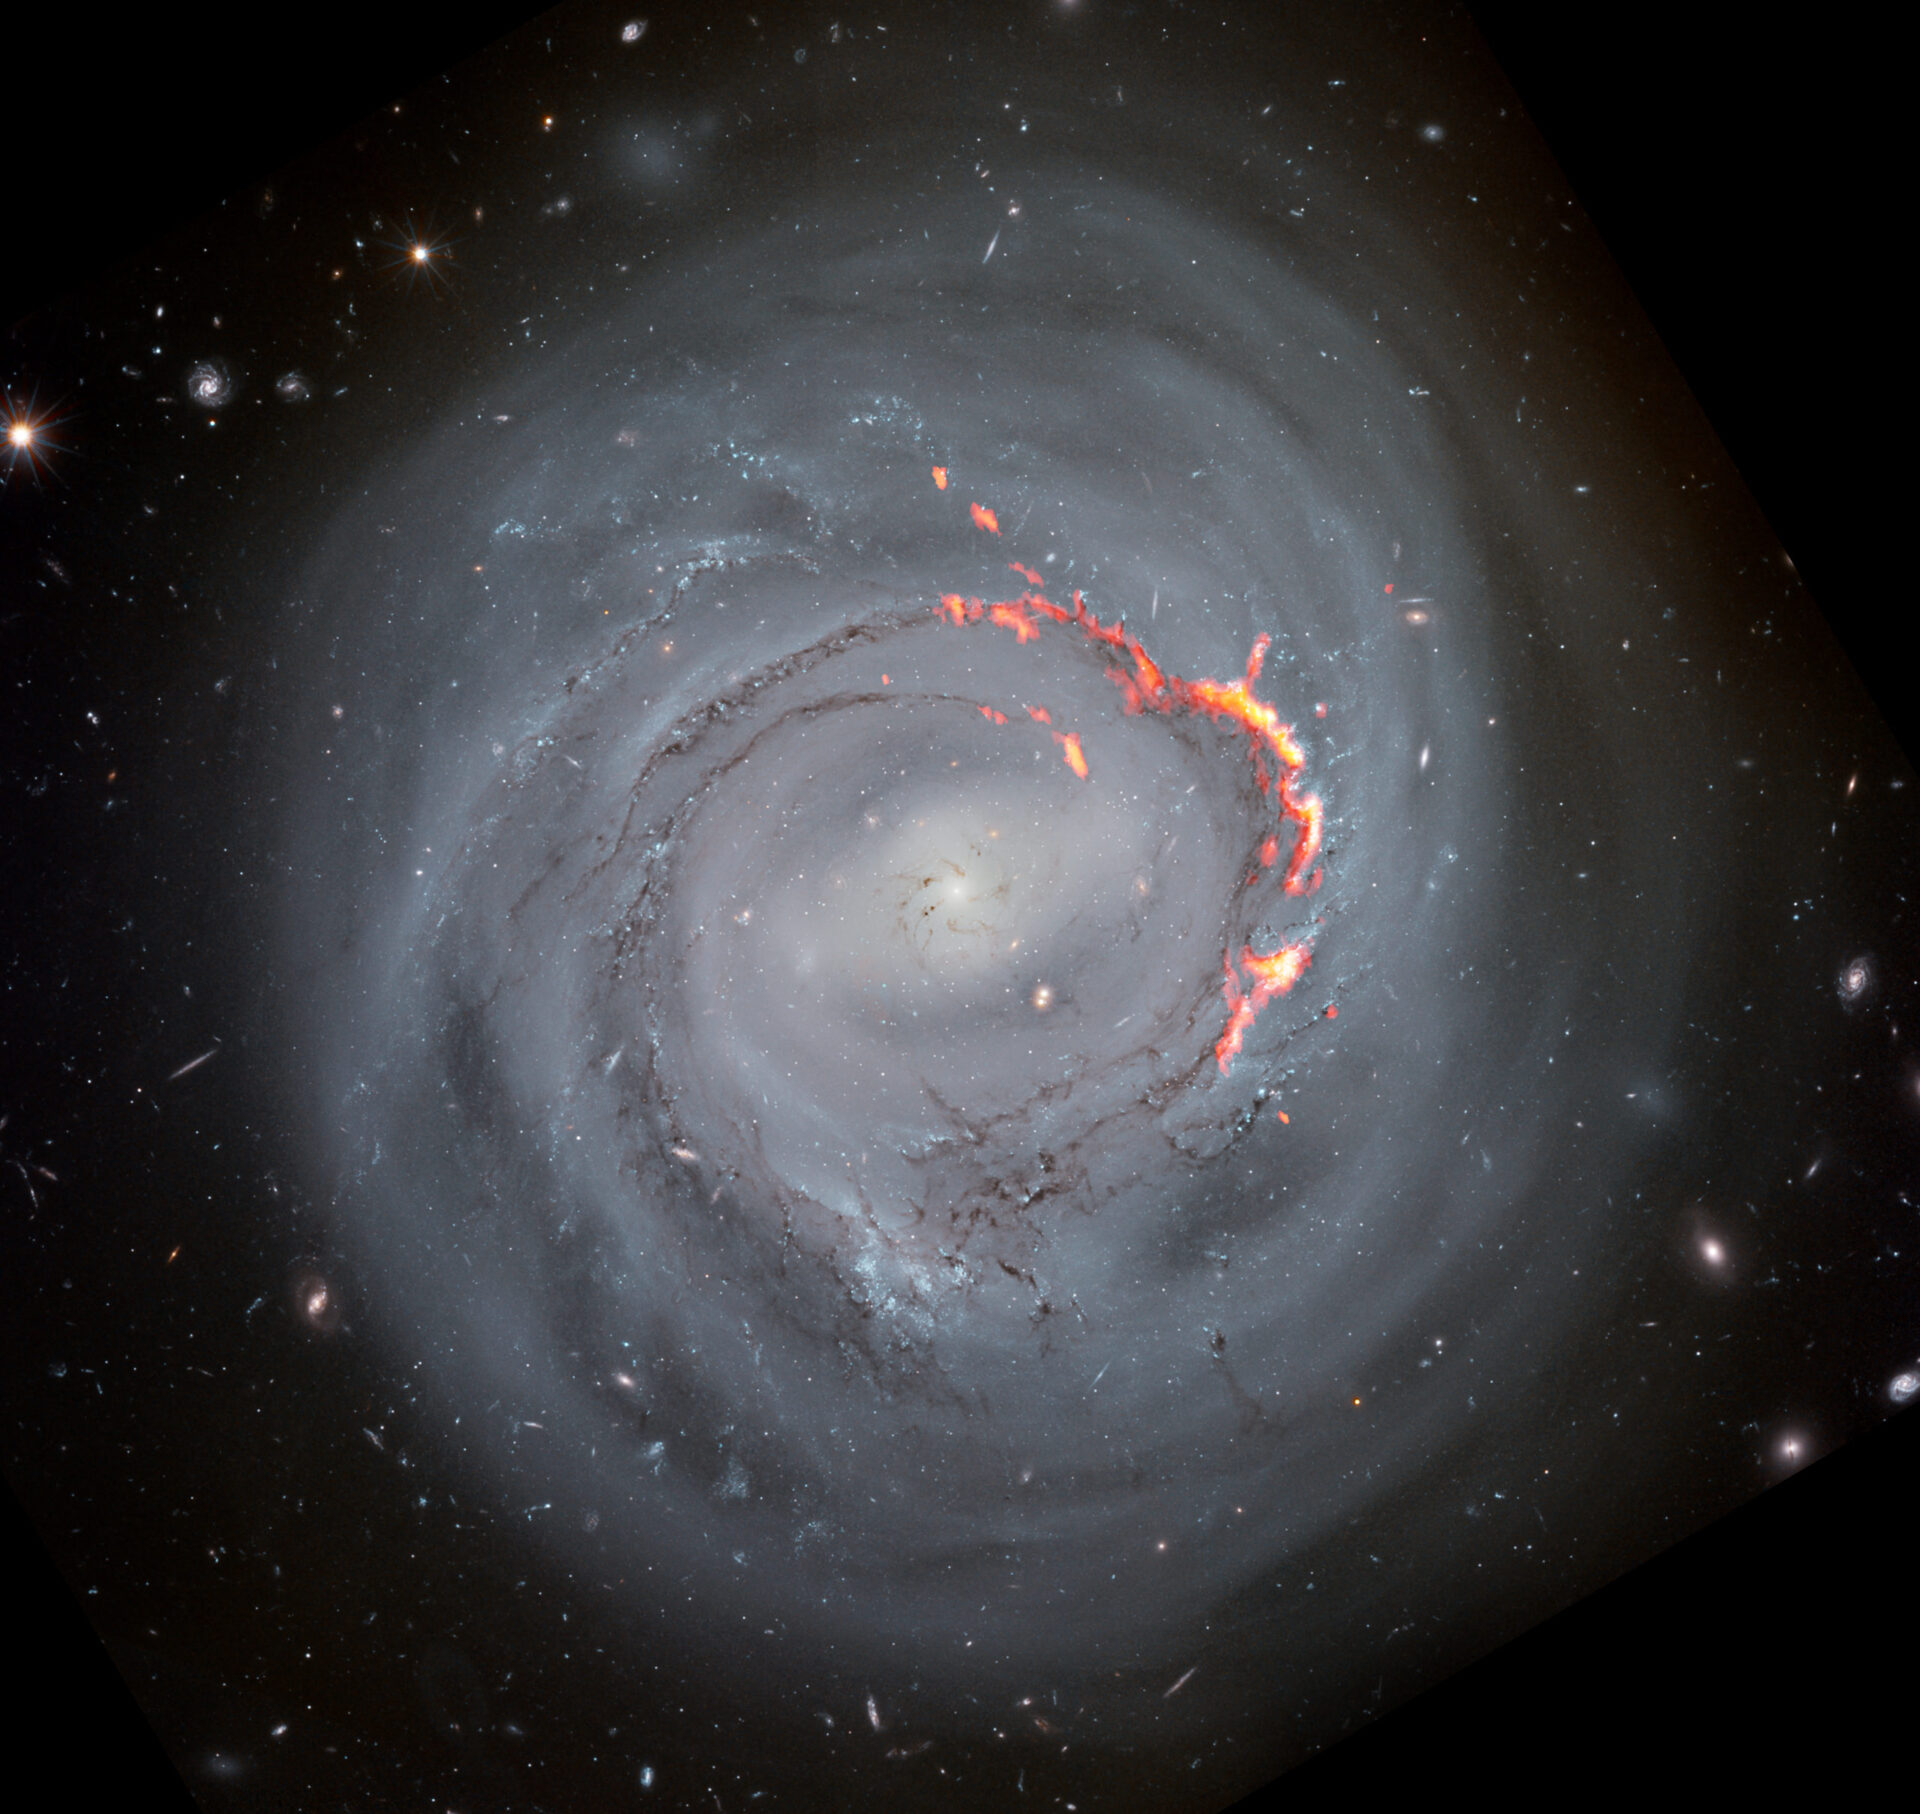 <p>Shown here in composite view, ALMA data (red/orange) reveals filament structures left behind by ram pressure stripping in a Hubble Space Telescope optical view of NGC4921. Scientists believe that these filaments are formed as magnetic fields in the galaxy prevent some matter from being stripped away.</p>
<p>Credit:  ALMA (ESO/NAOJ/NRAO)/S. Dagnello (NRAO), NASA/ESA/Hubble/K. Cook (LLNL), L. Shatz</p>
